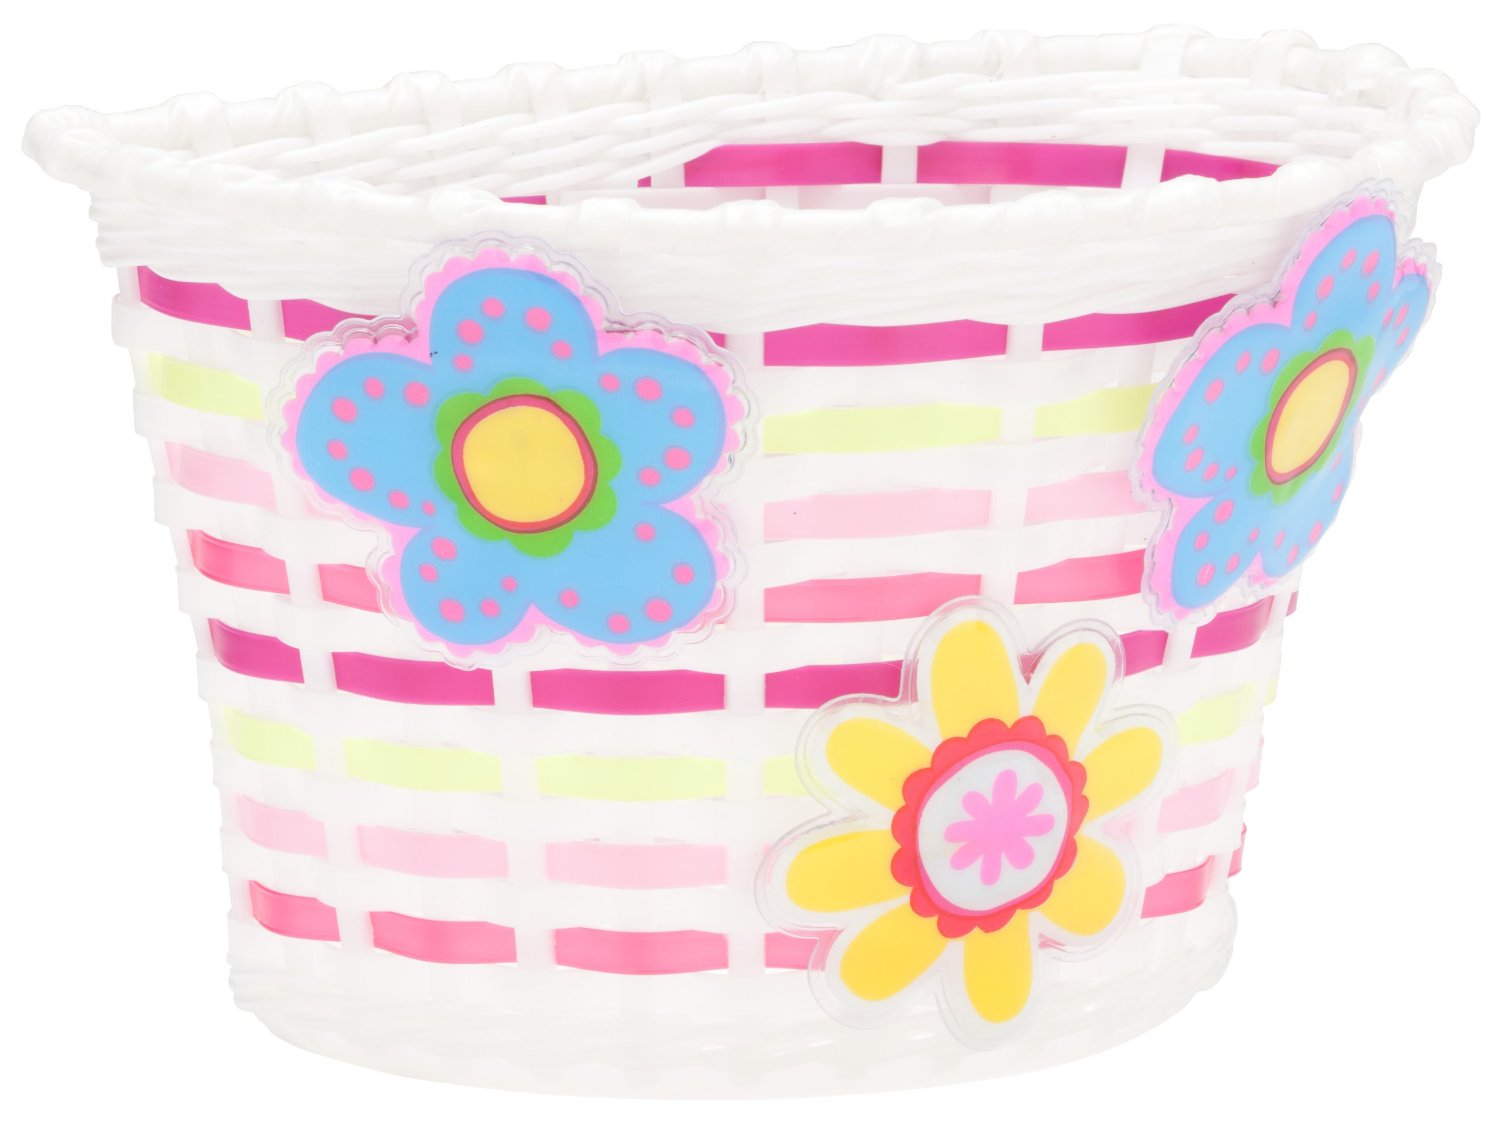 Review of Schwinn Girl's Bicycle Lighted Basket